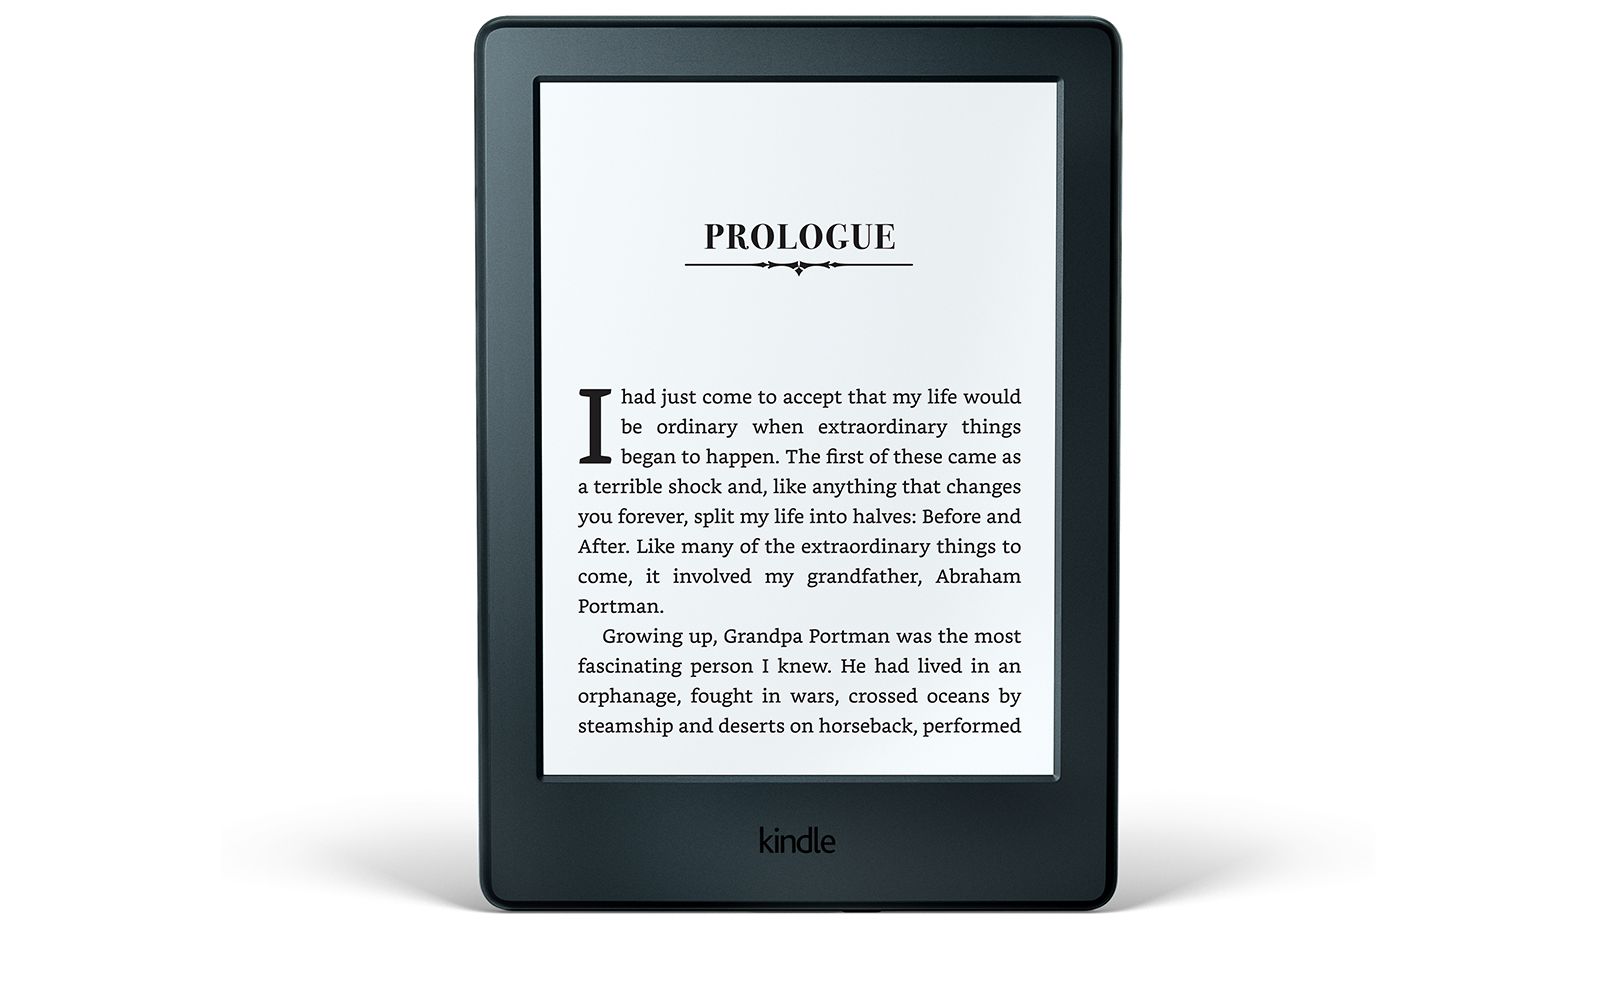 new amazon kindle 2016 double memory thinner lighter and more image 1